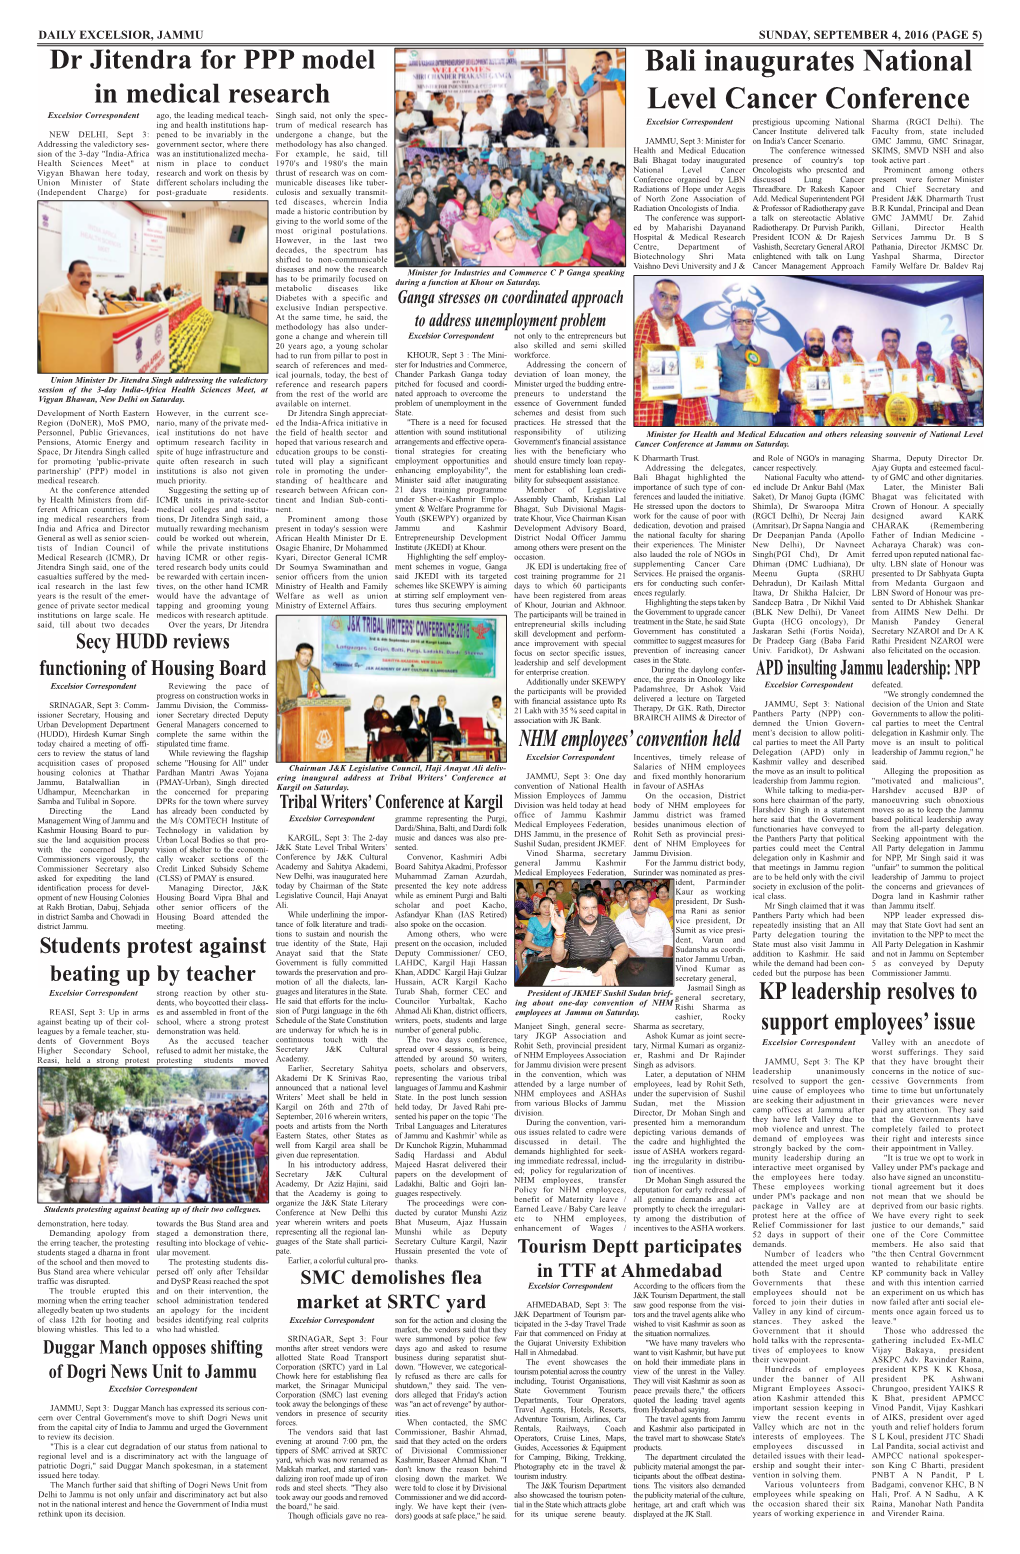 Page5local.Qxd (Page 1)